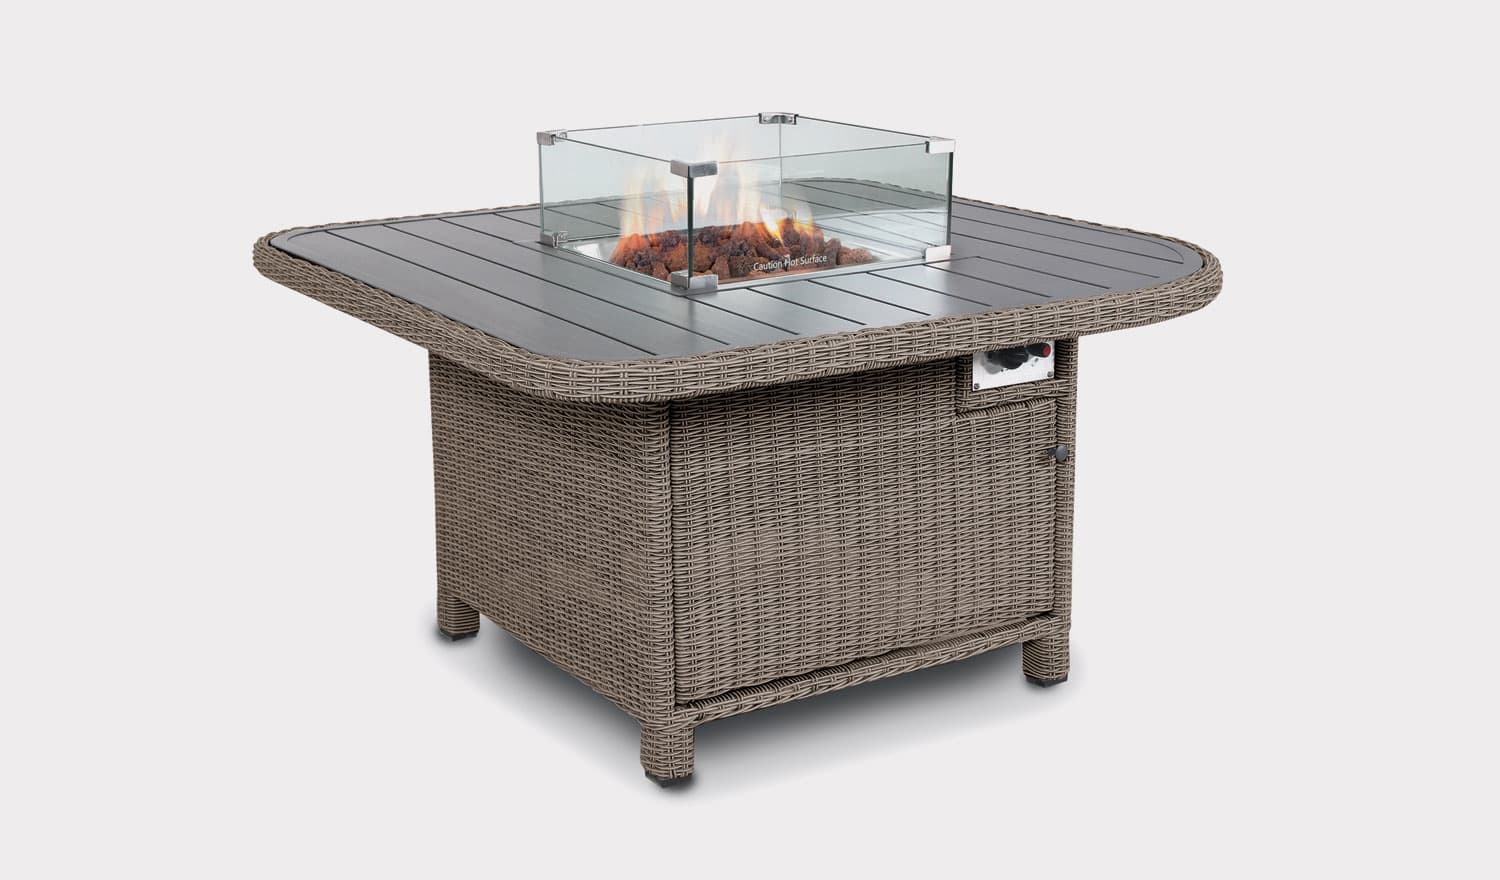 Palma Grande Fire Pit Table Kettler, Fire Pit Table Manufacturers